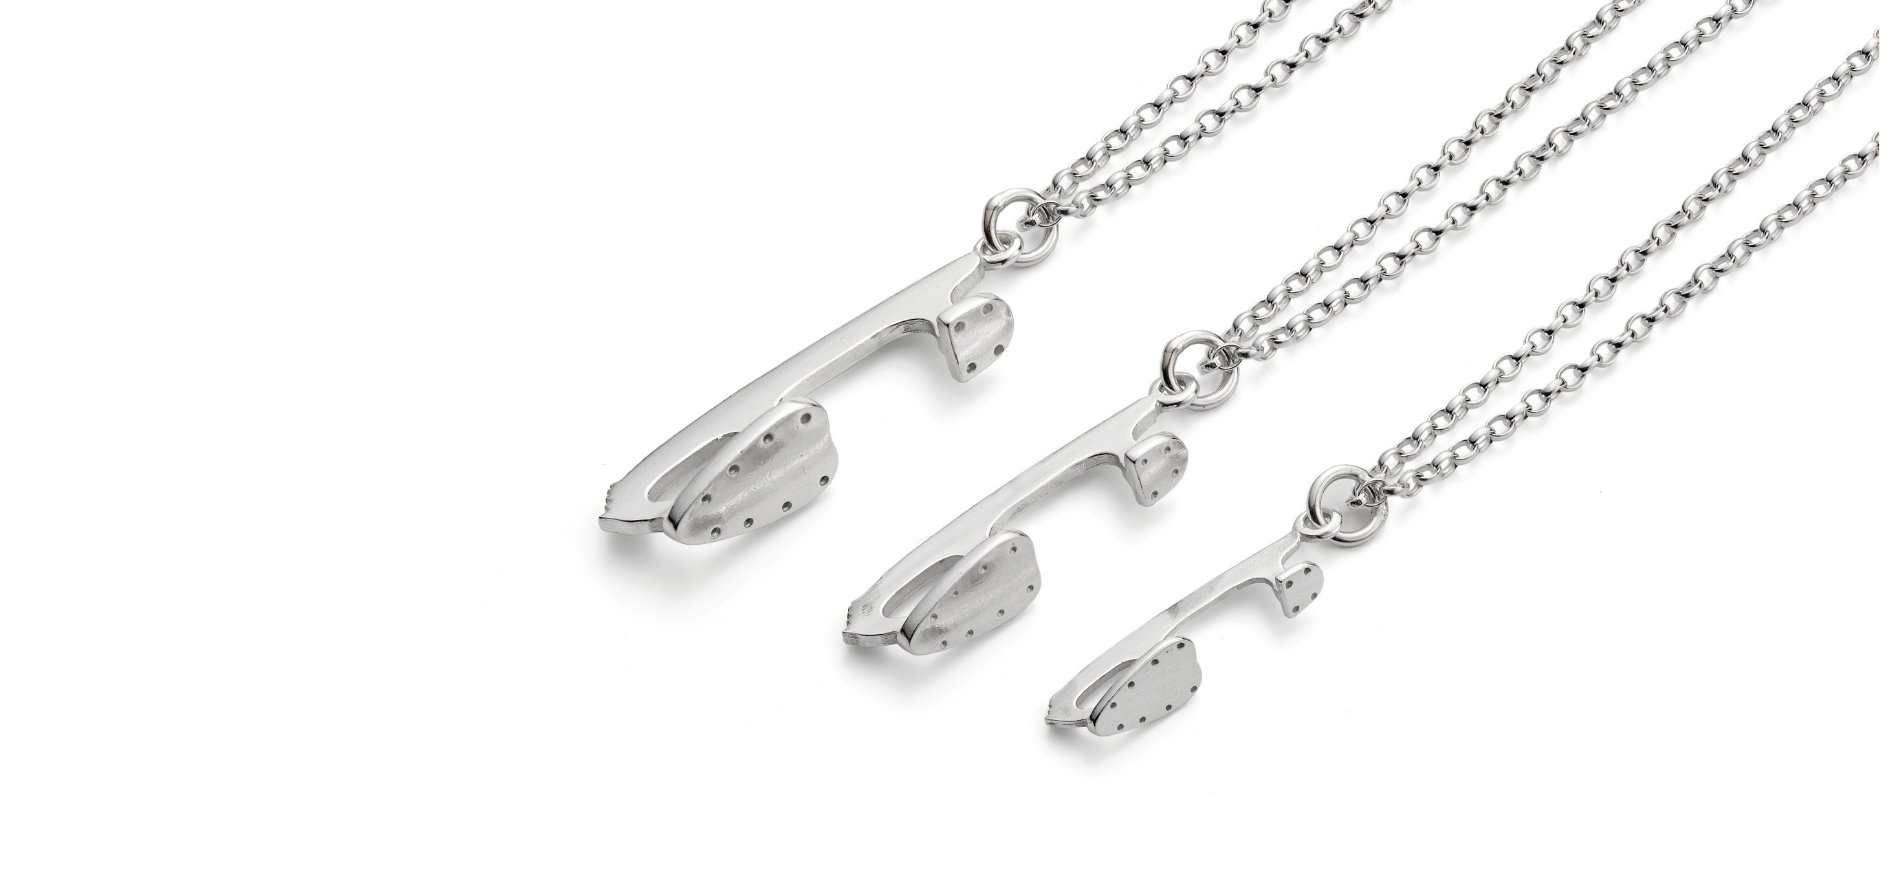 Silver Ice Skating Jewellery Necklaces on a white background